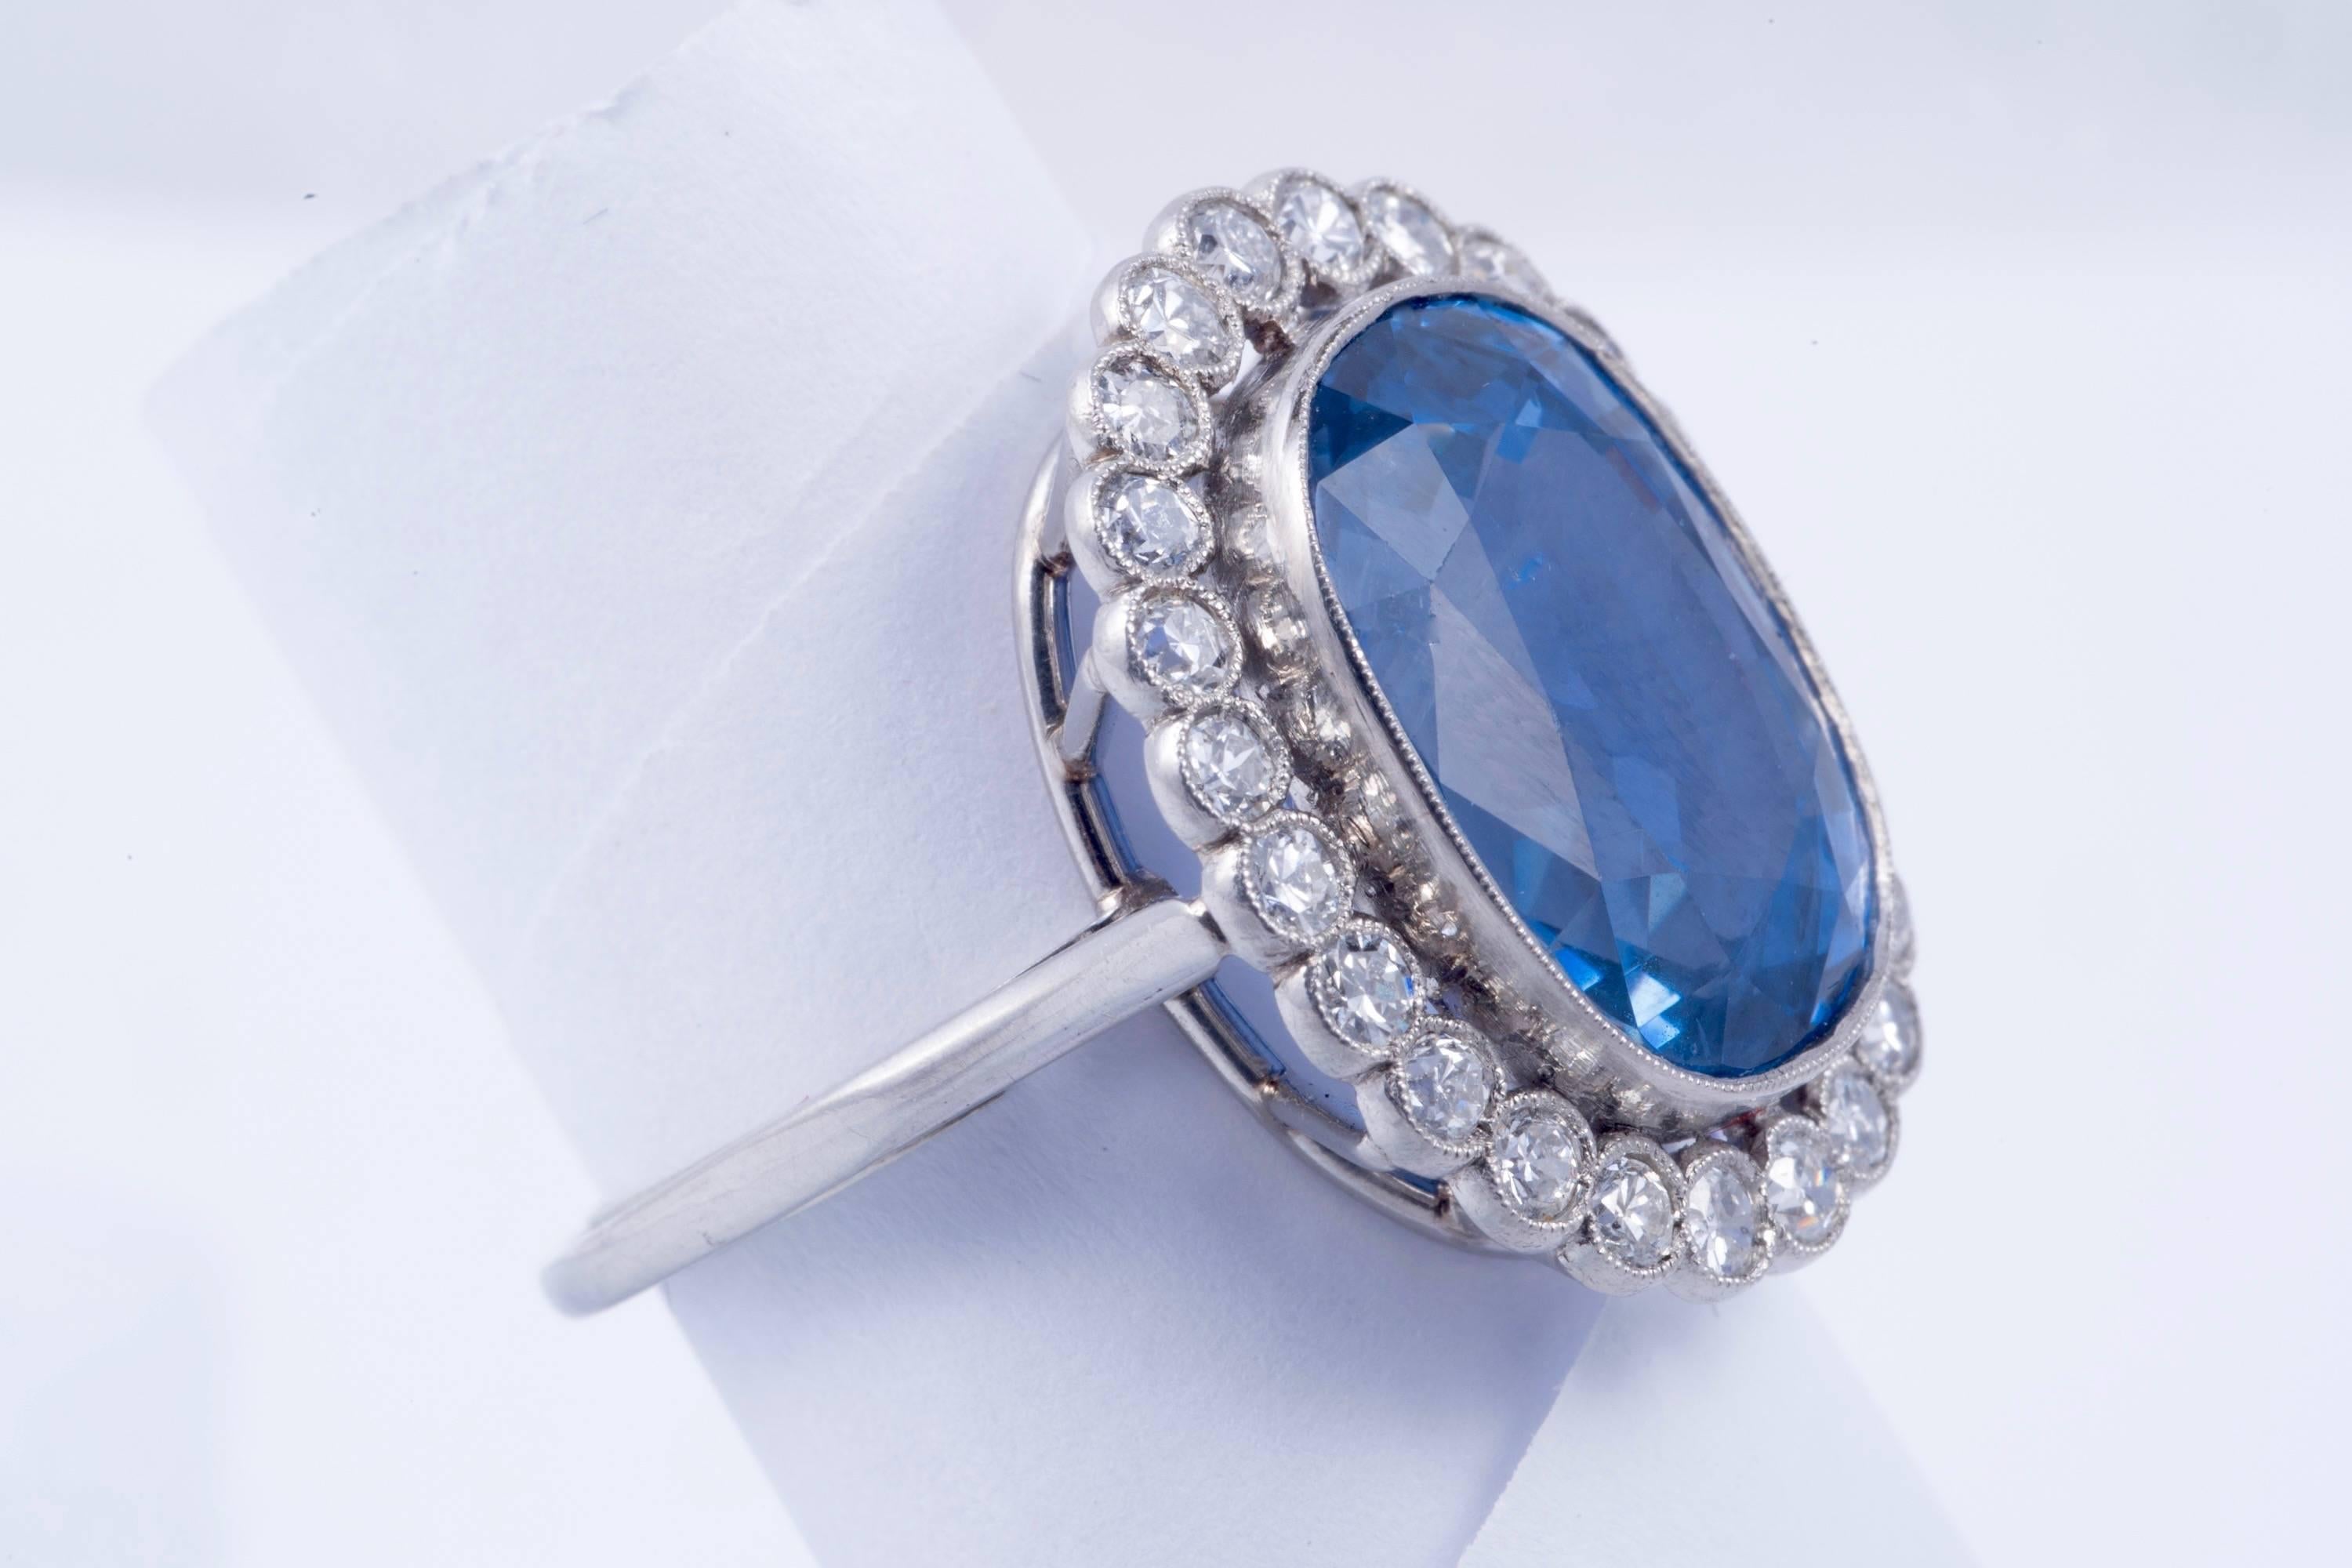 Magnificent Natural Blue Sapphire and Diamond Ring. The center sapphire is certified by the  American Gemological Laboratories (AGL) as Natura colorl and and of Ceylon origin. The sapphire weighs 12.41cts. There are 24 european cut diamonds weighing